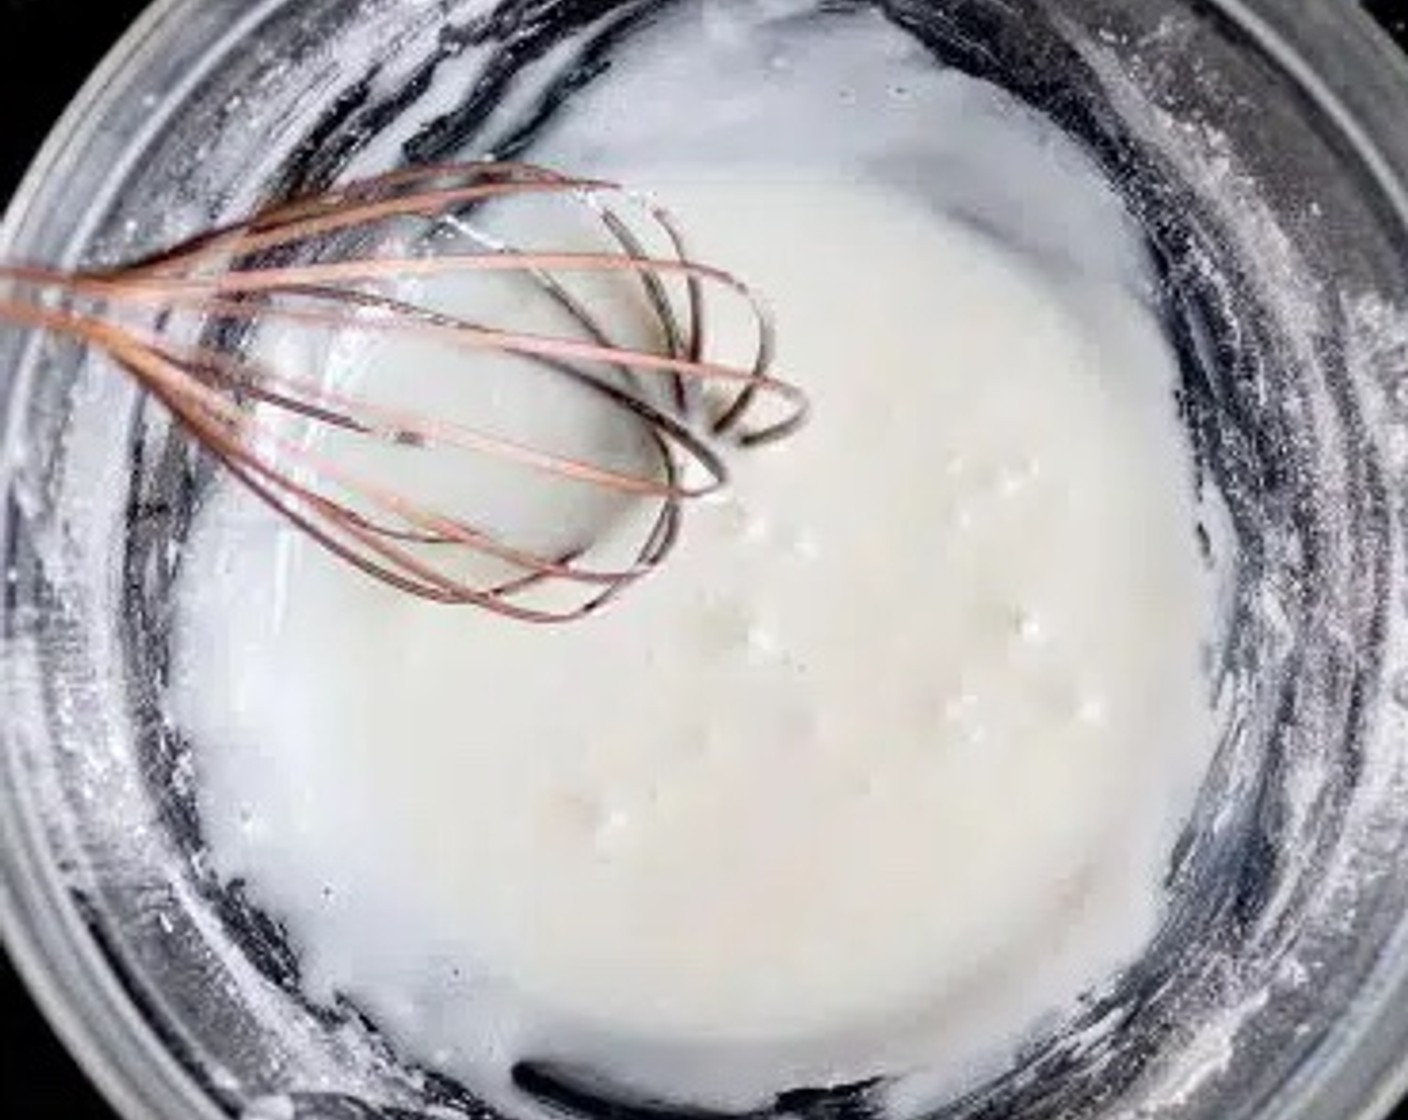 step 1 Whisk together Powdered Confectioners Sugar (1 cup) and Non-Dairy Milk (1 Tbsp) in a mixing bowl until smooth. The mixture should form a thick paste.